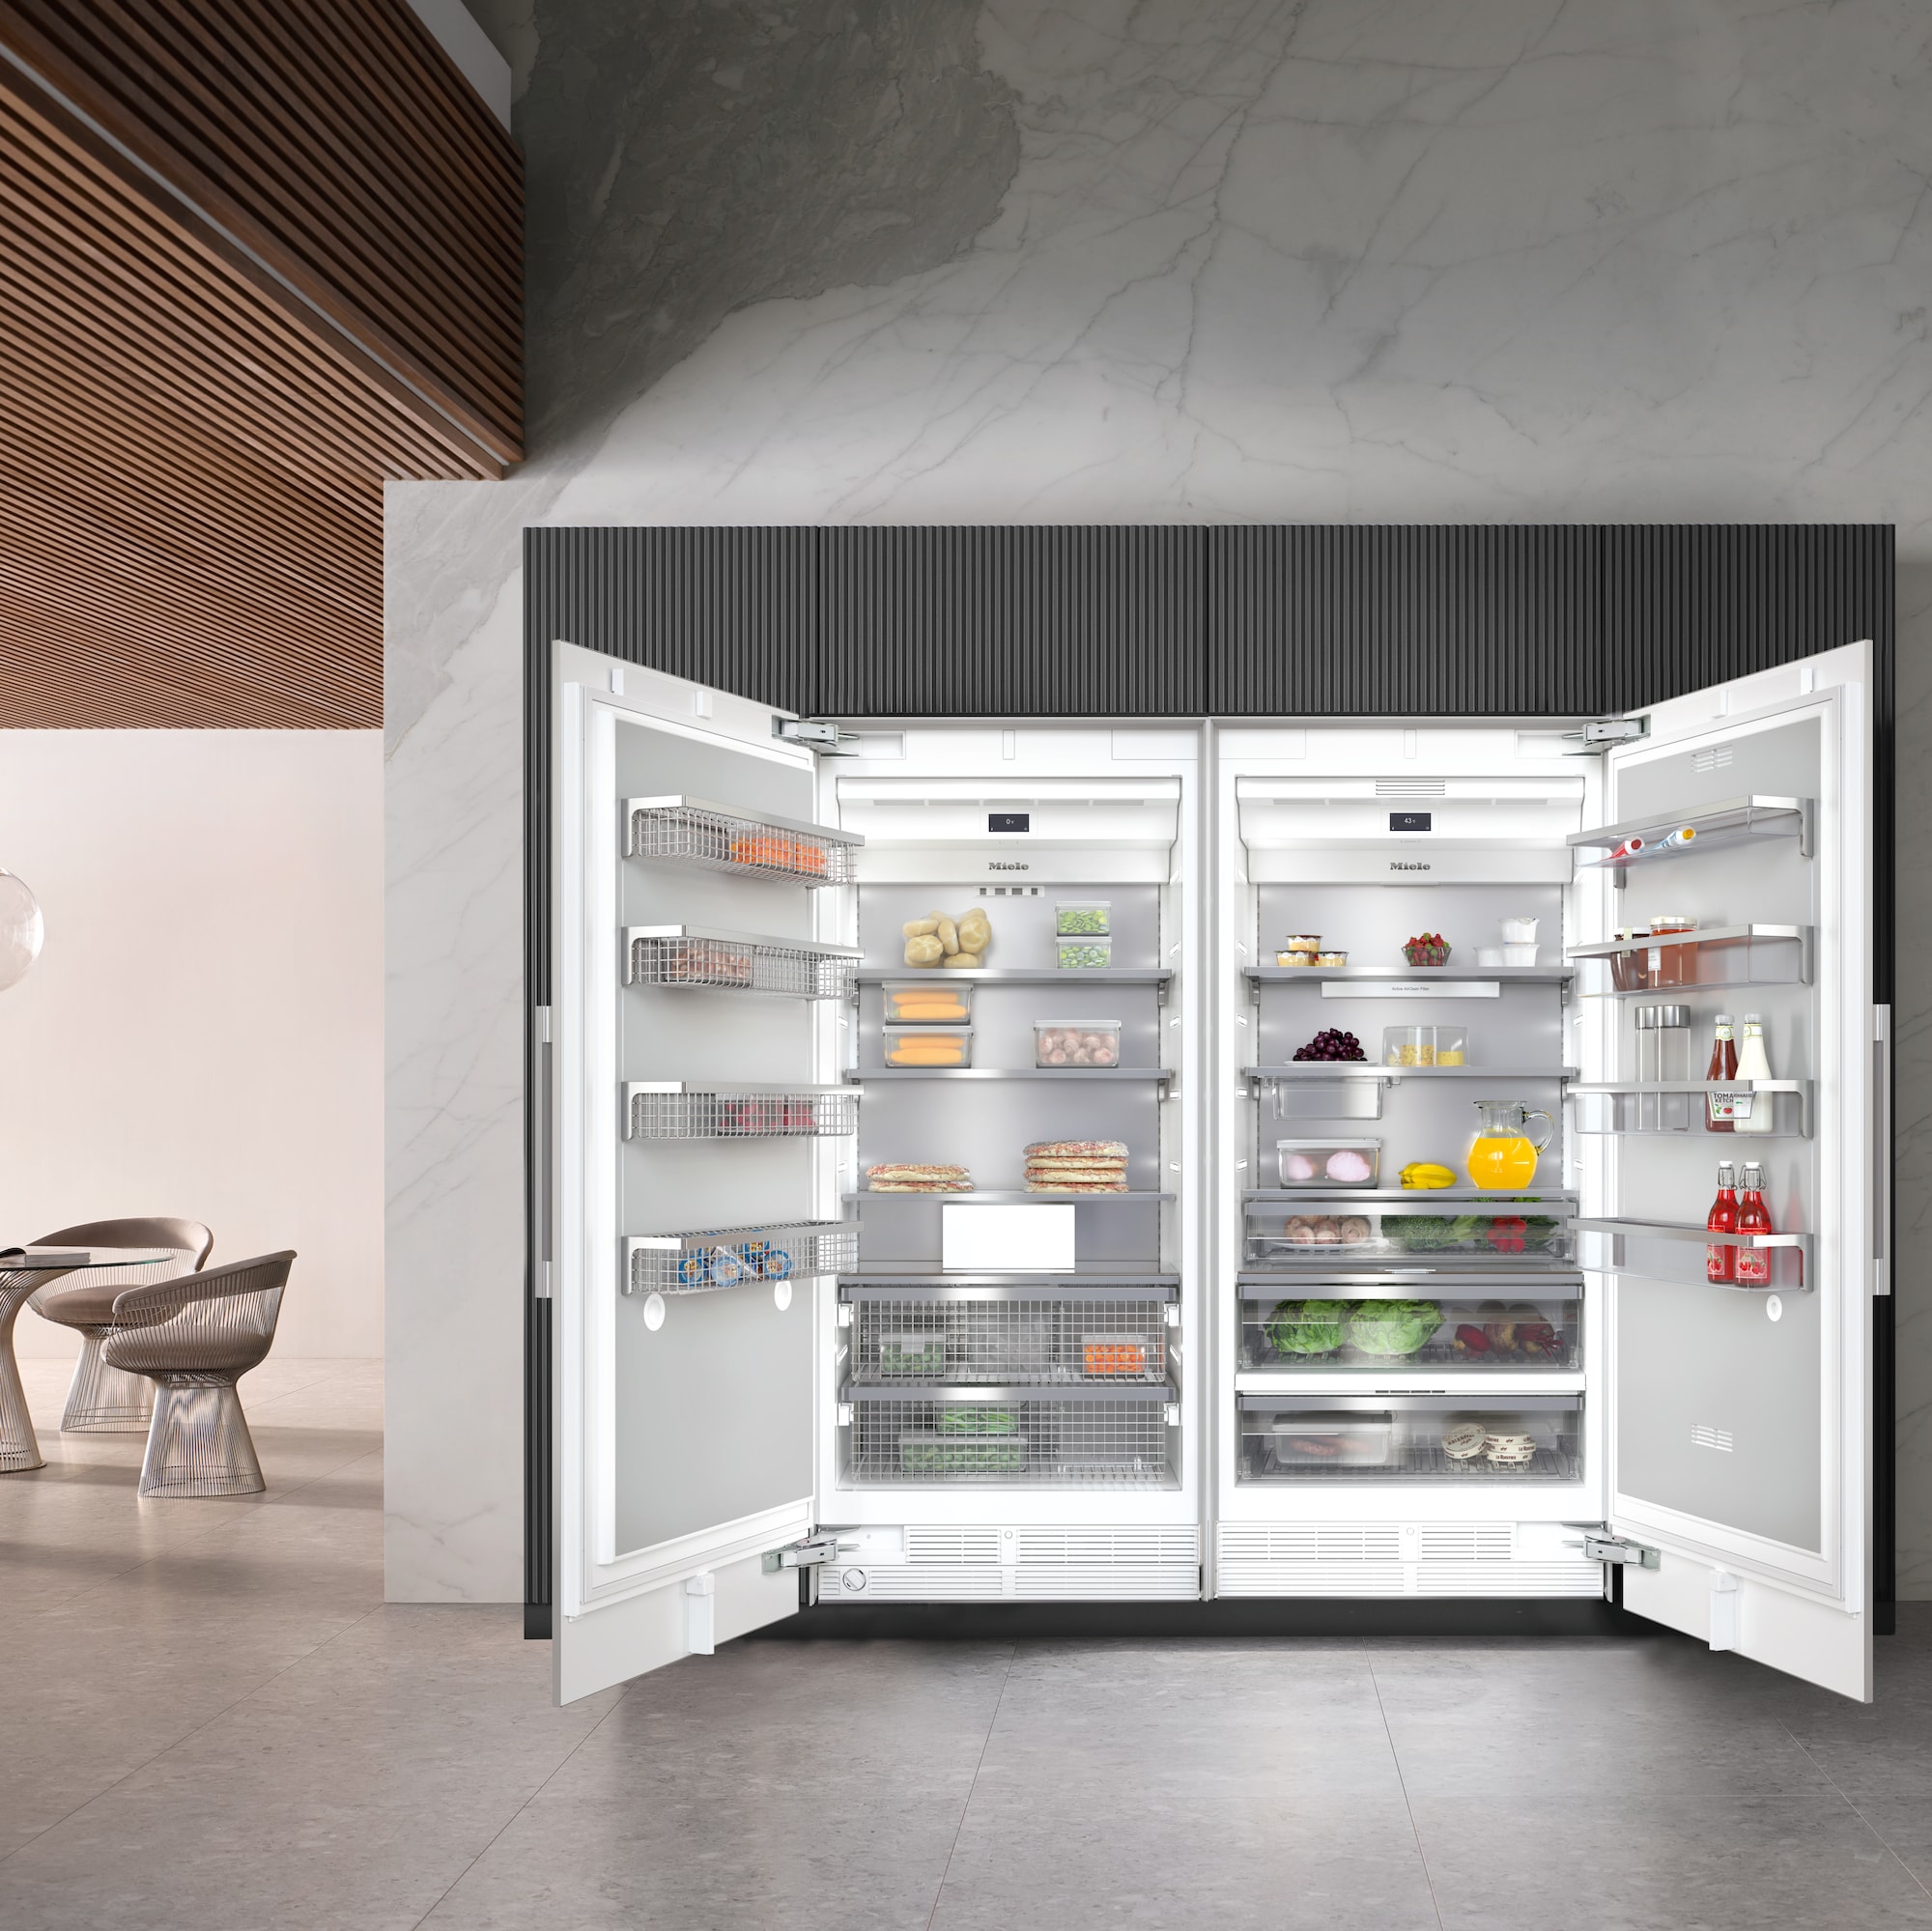 Mastering high end refrigerators with MasterCool.